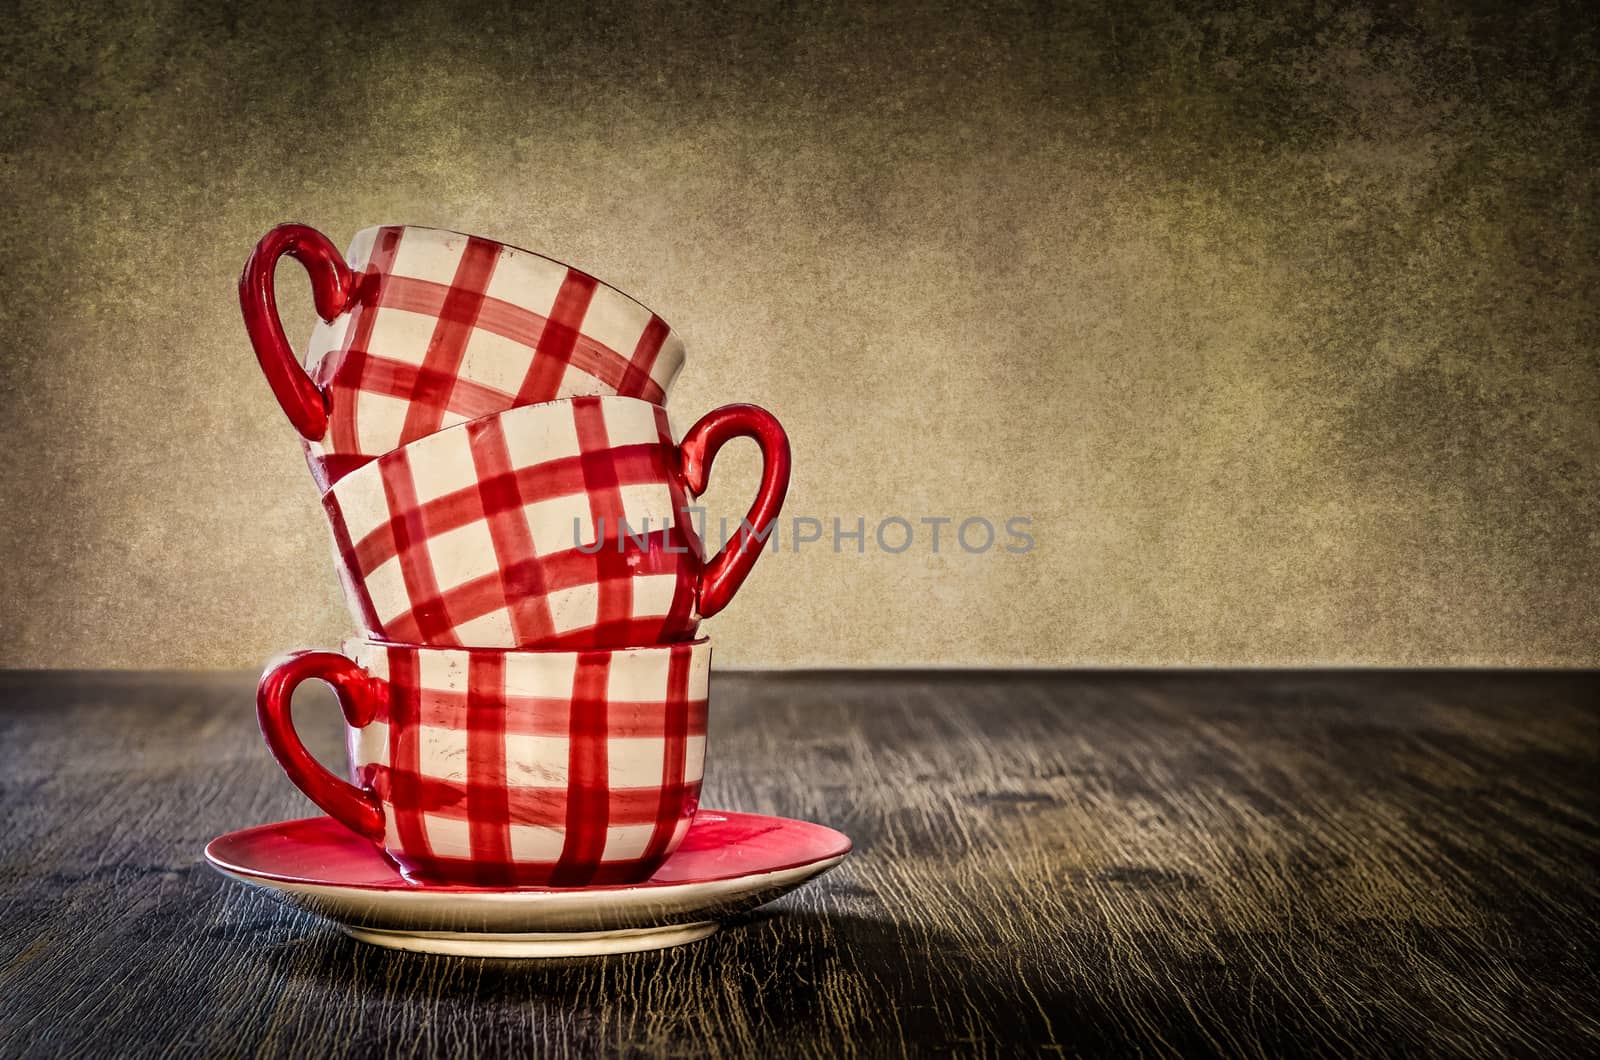 Colorful coffee cups on the table in vintage style by martinm303